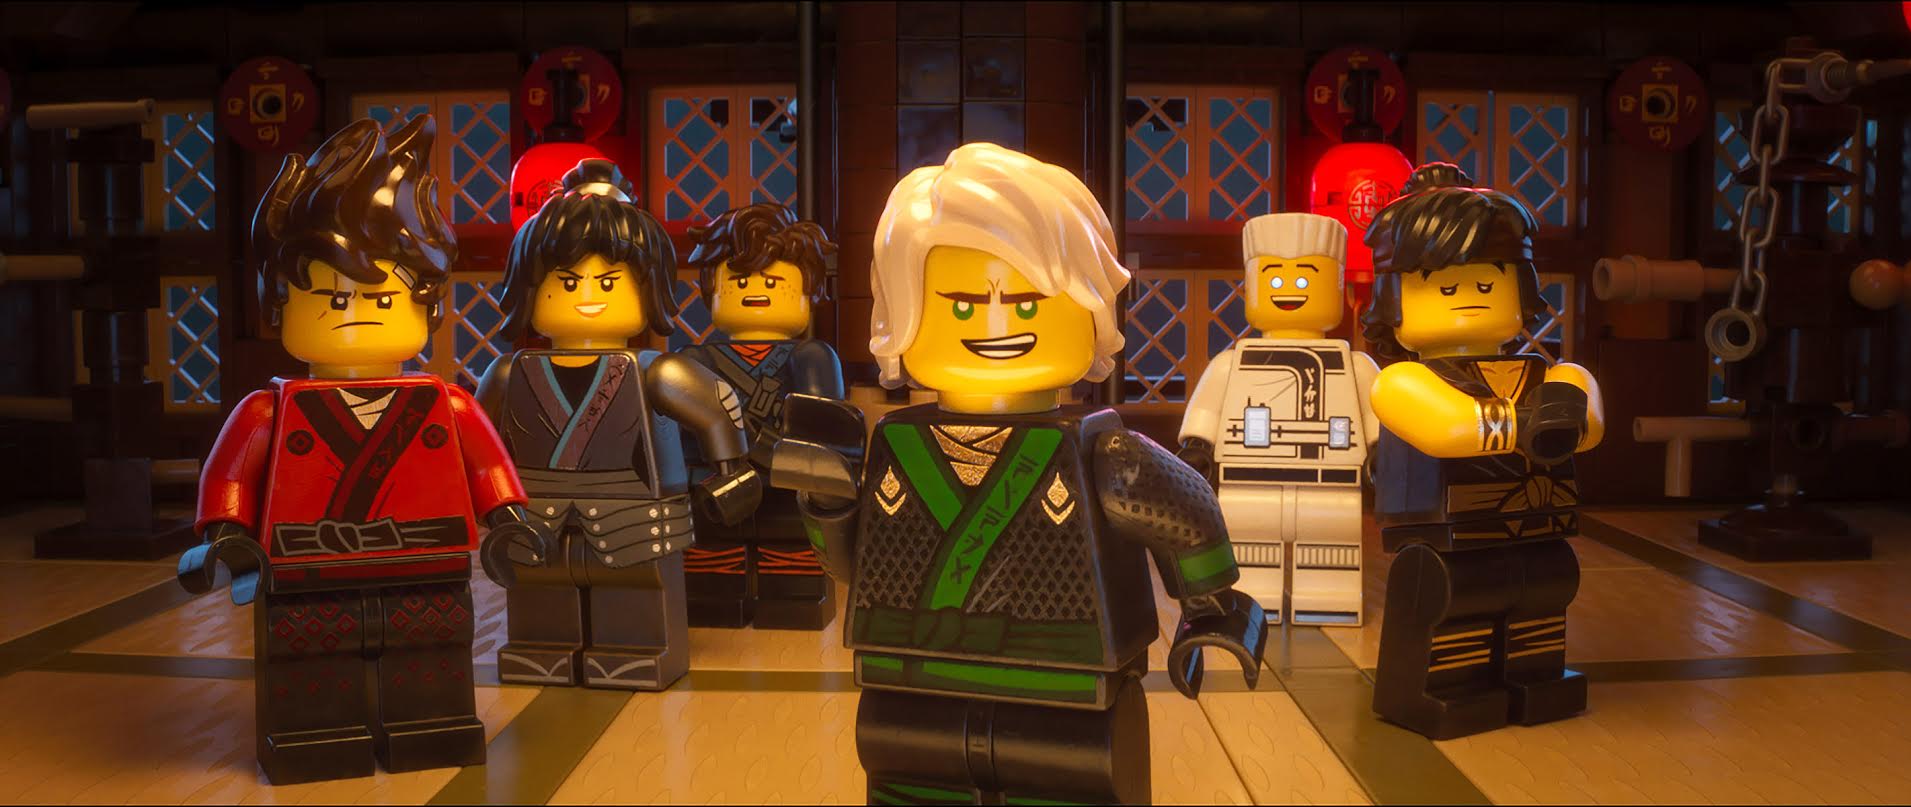  (L-R) Kai (voiced by MICHAEL PE&Ntilde;A), Nya (voiced by ABBI JACOBSON), Jay (voiced by KUMAIL NANJIANI), Lloyd (voiced by DAVE FRANCO), Zane (voiced by ZACH WOODS) and Cole (voiced by FRED ARMISEN) in the new animated adventure &ldquo;THE LEGO&reg; NINJAGO MOVIE,&rdquo; from Warner Bros. Pictures and Warner Animation Group, in association with LEGO System A/S, a Warner Bros. Pictures release. 